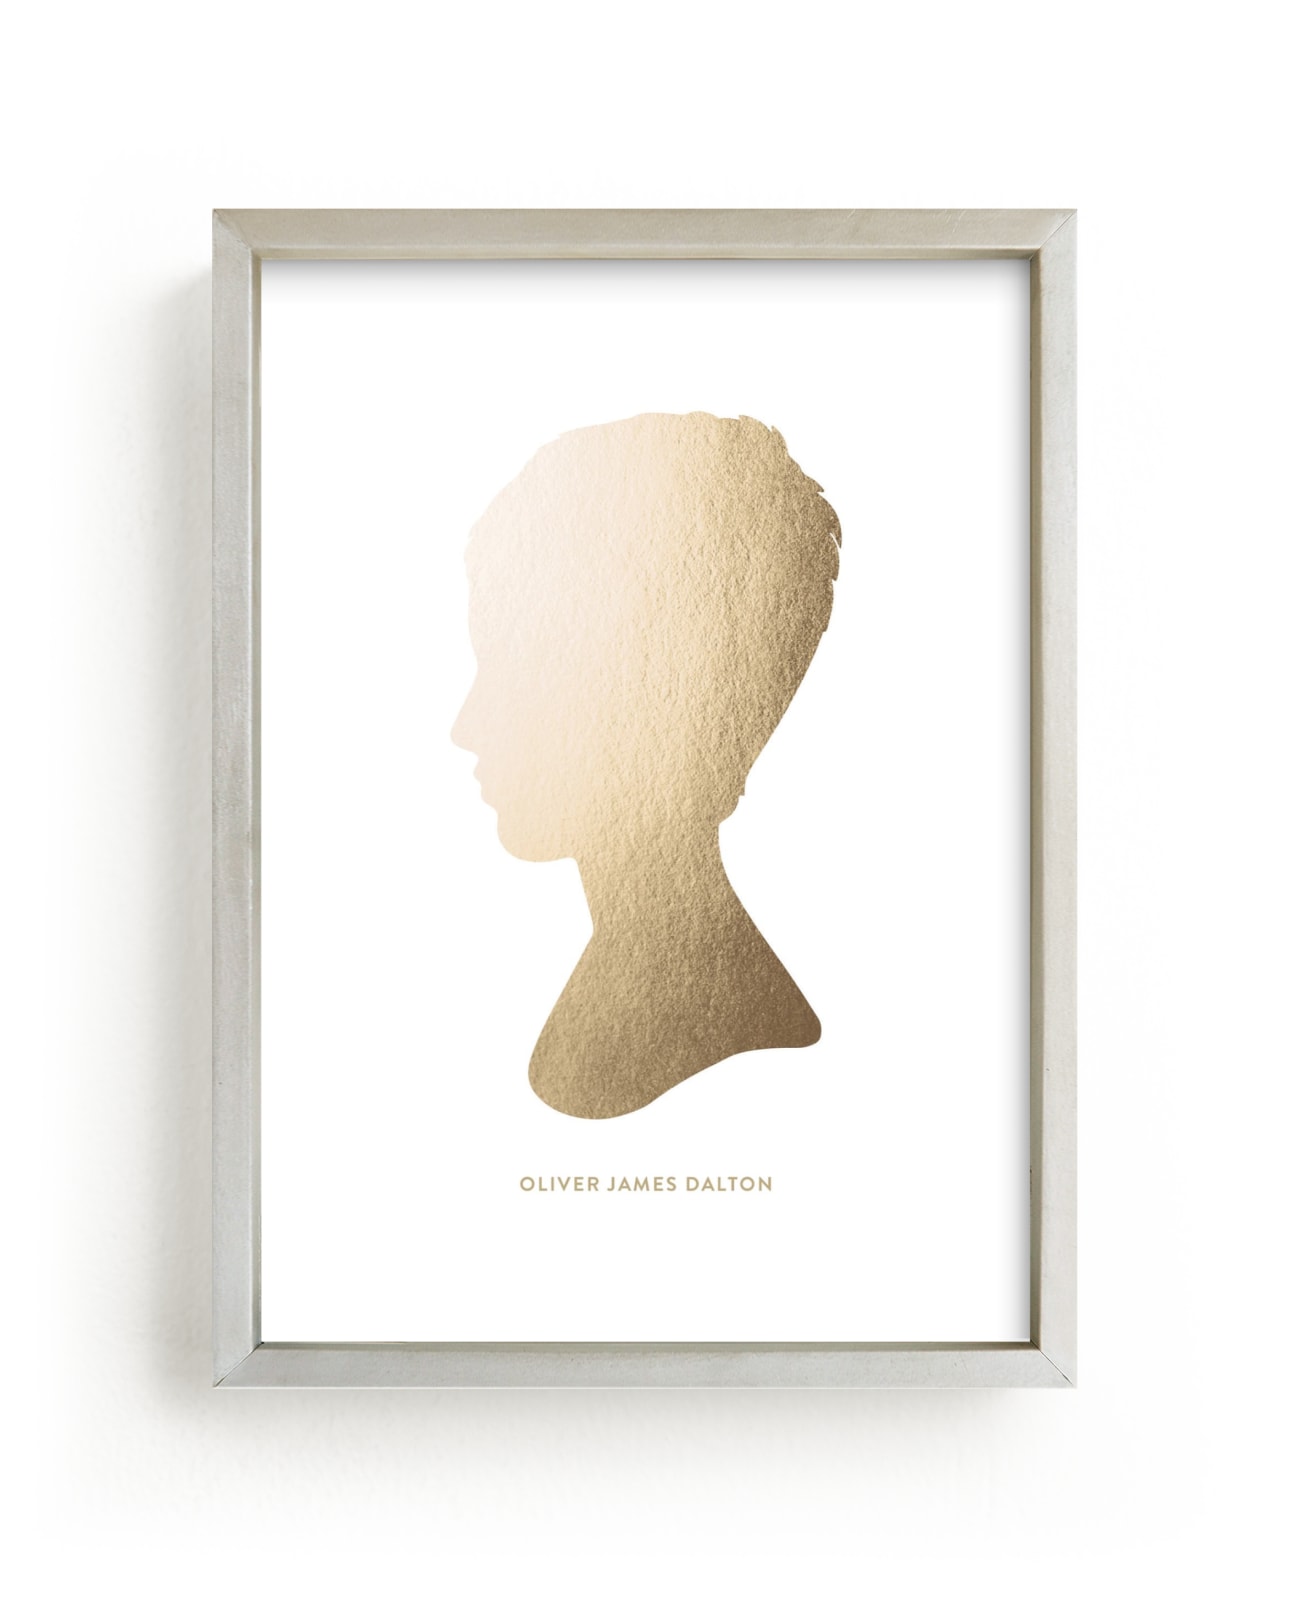 This is a gold silhouette art by Minted called Silhouette Foil  Art.